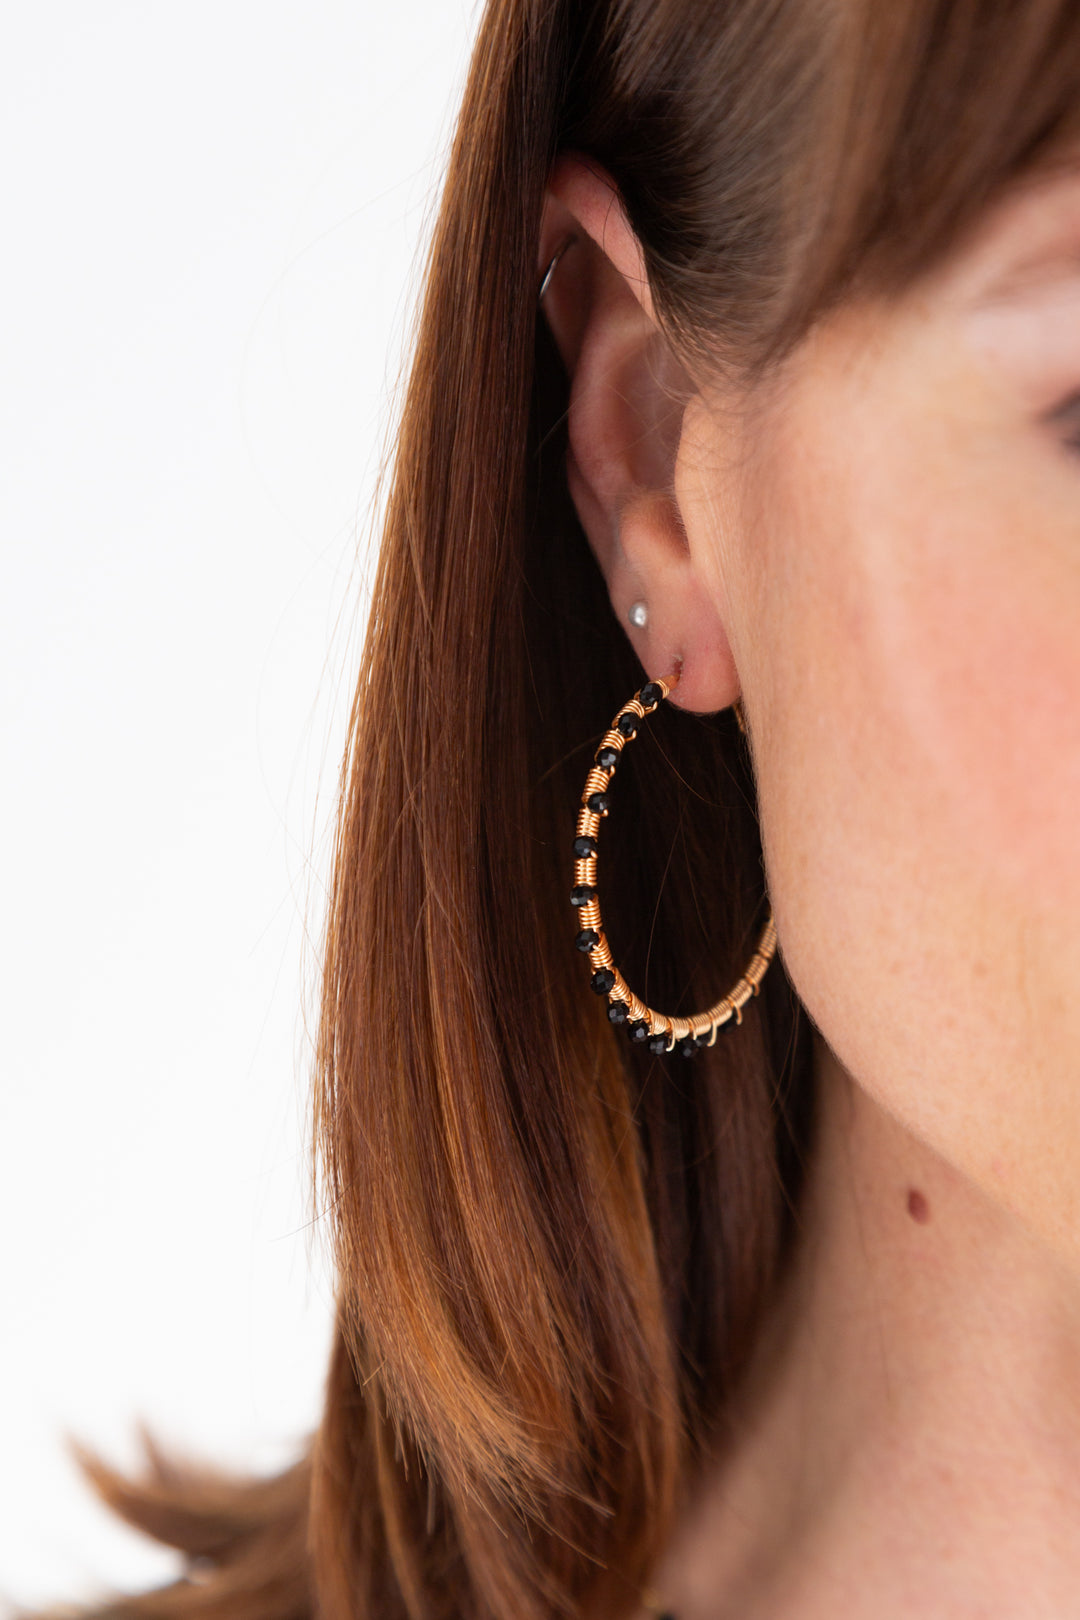 Retro Hoop in Black and Gold Earrings-ACCESSORIES-kindacollection-Kinda